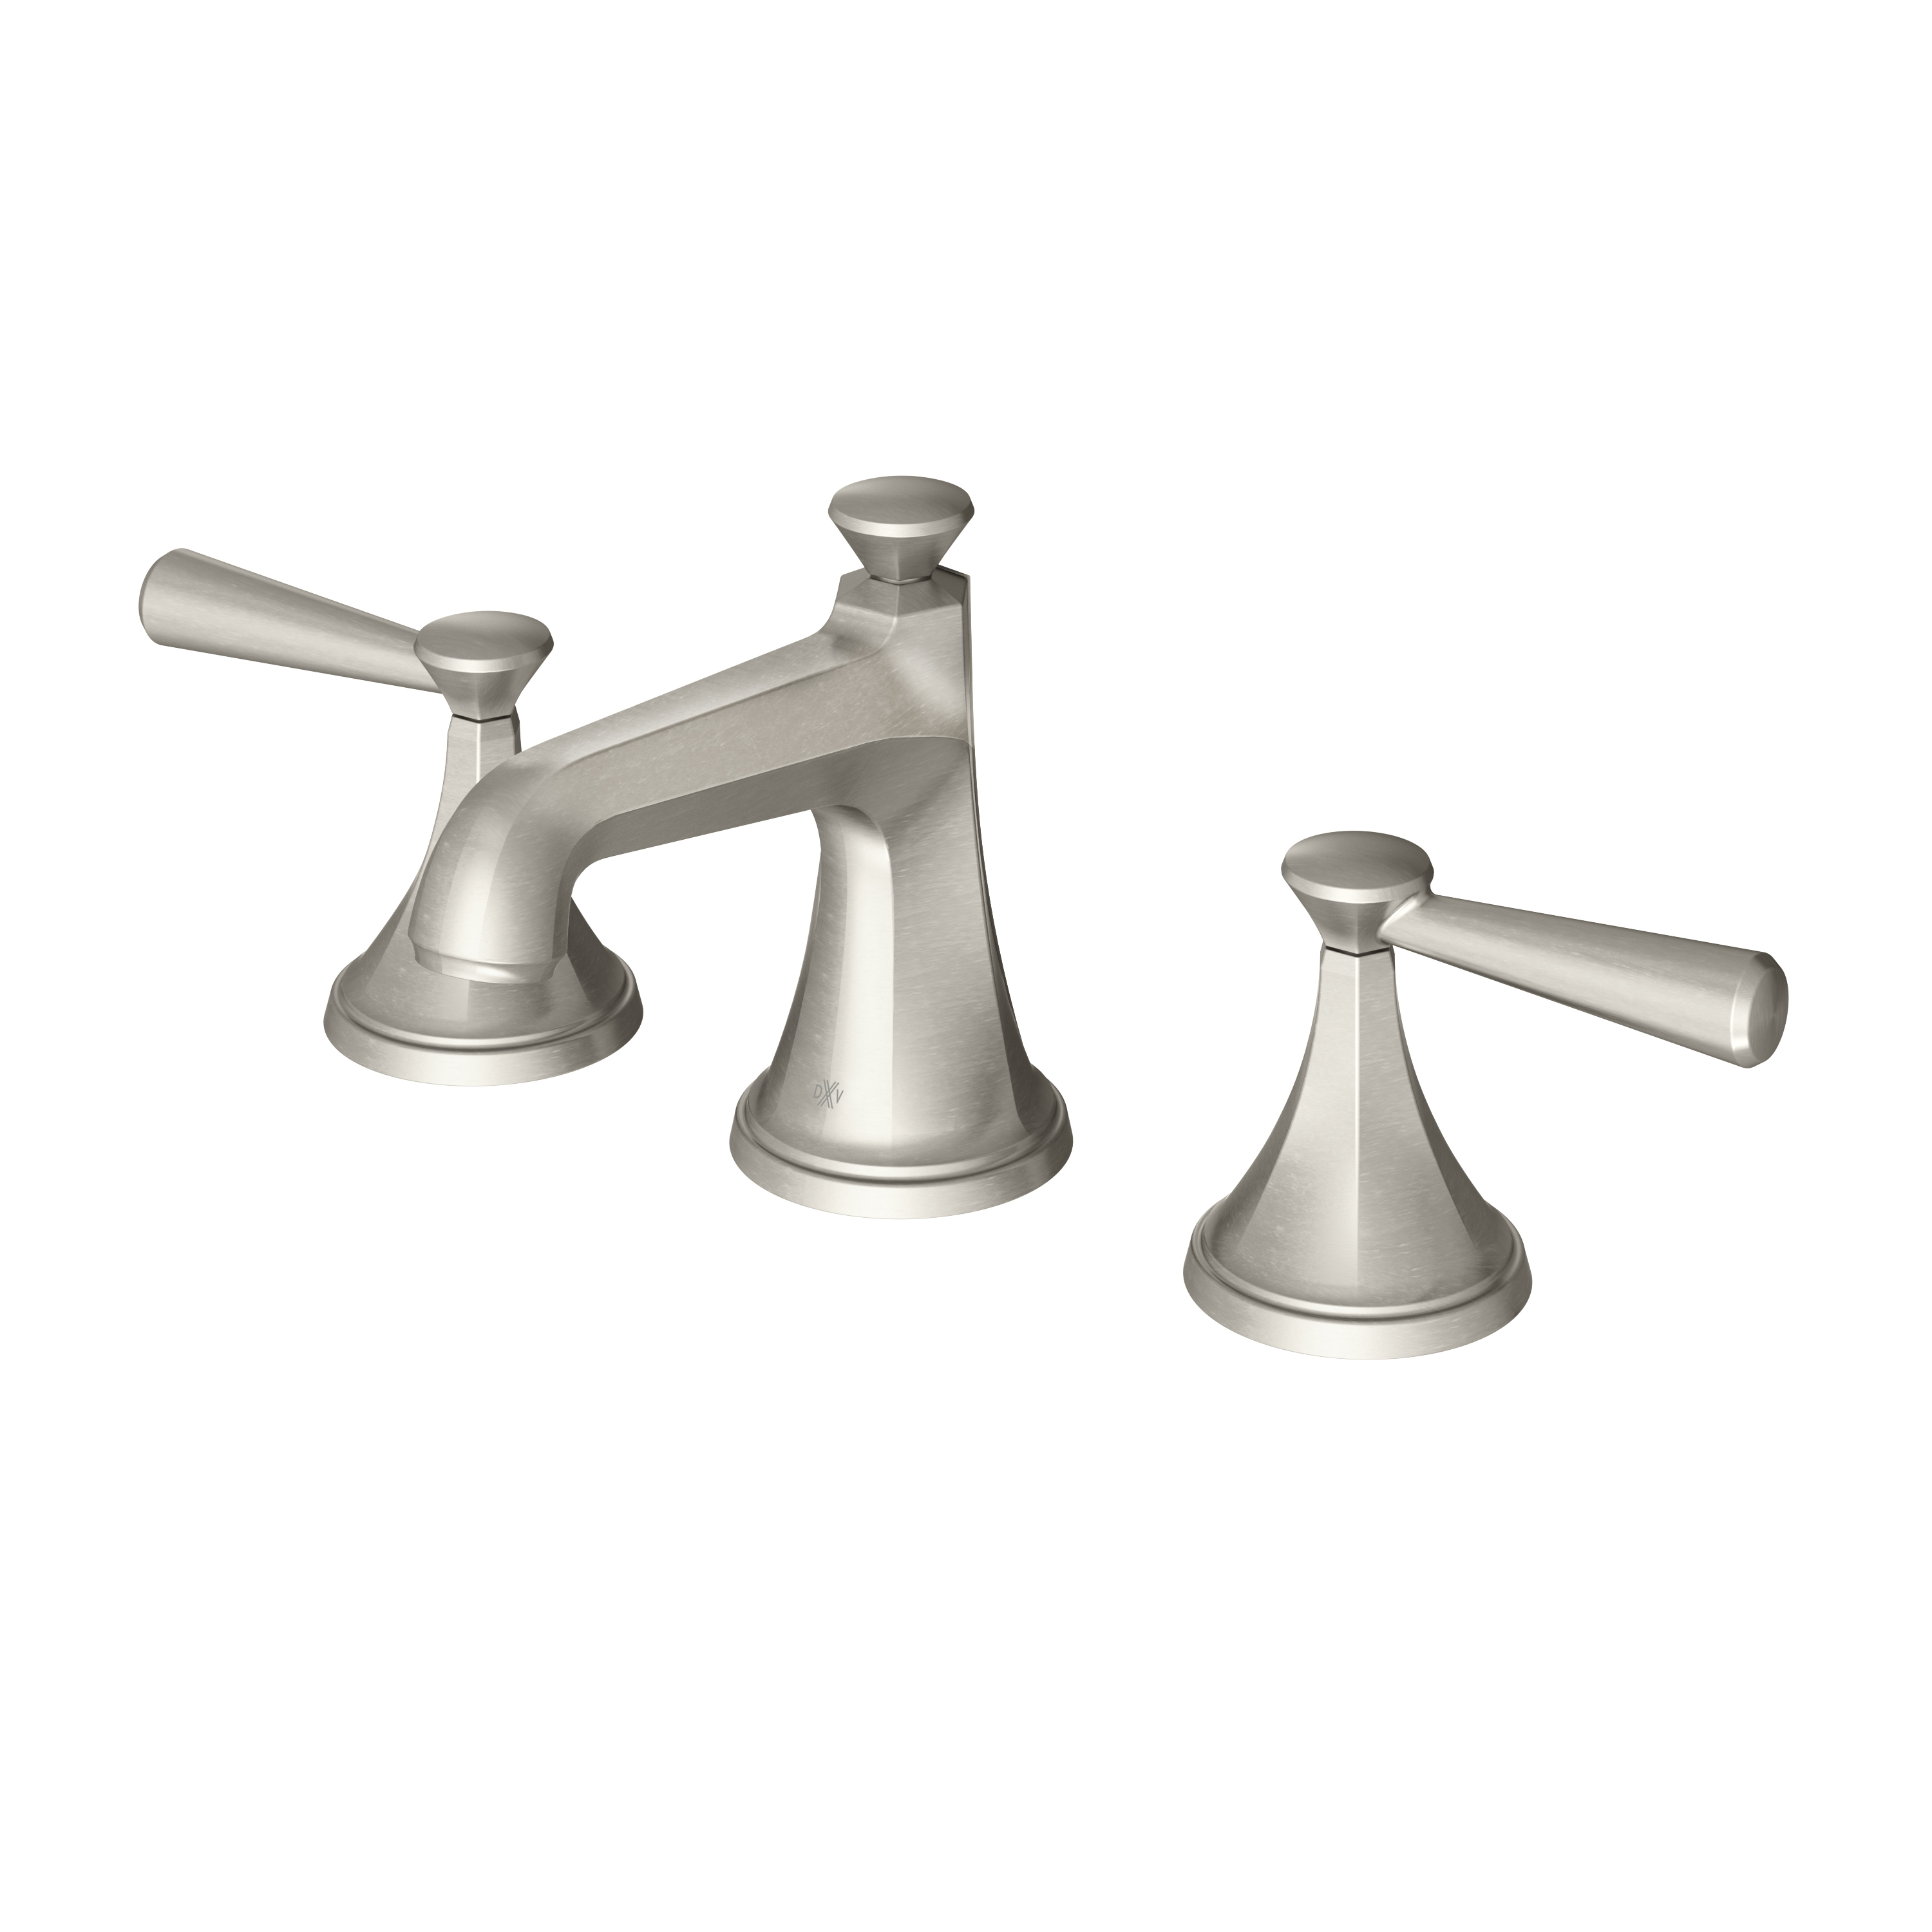 Fitzgerald 2-Handle Widespread Bathroom Faucet with Lever Handles